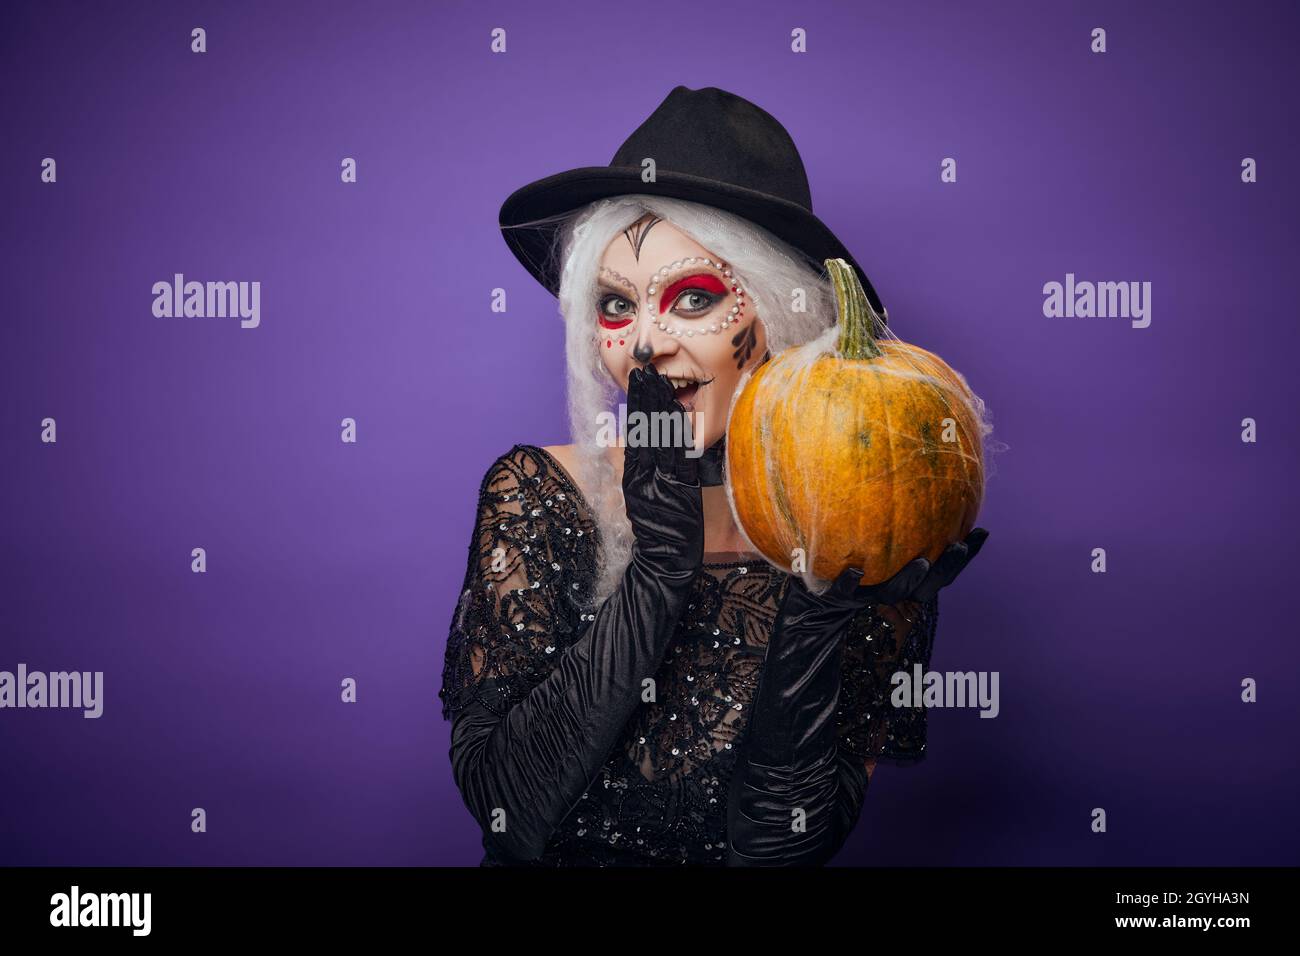 Cheerful young woman with Halloween make-up and pumpkin Stock Photo